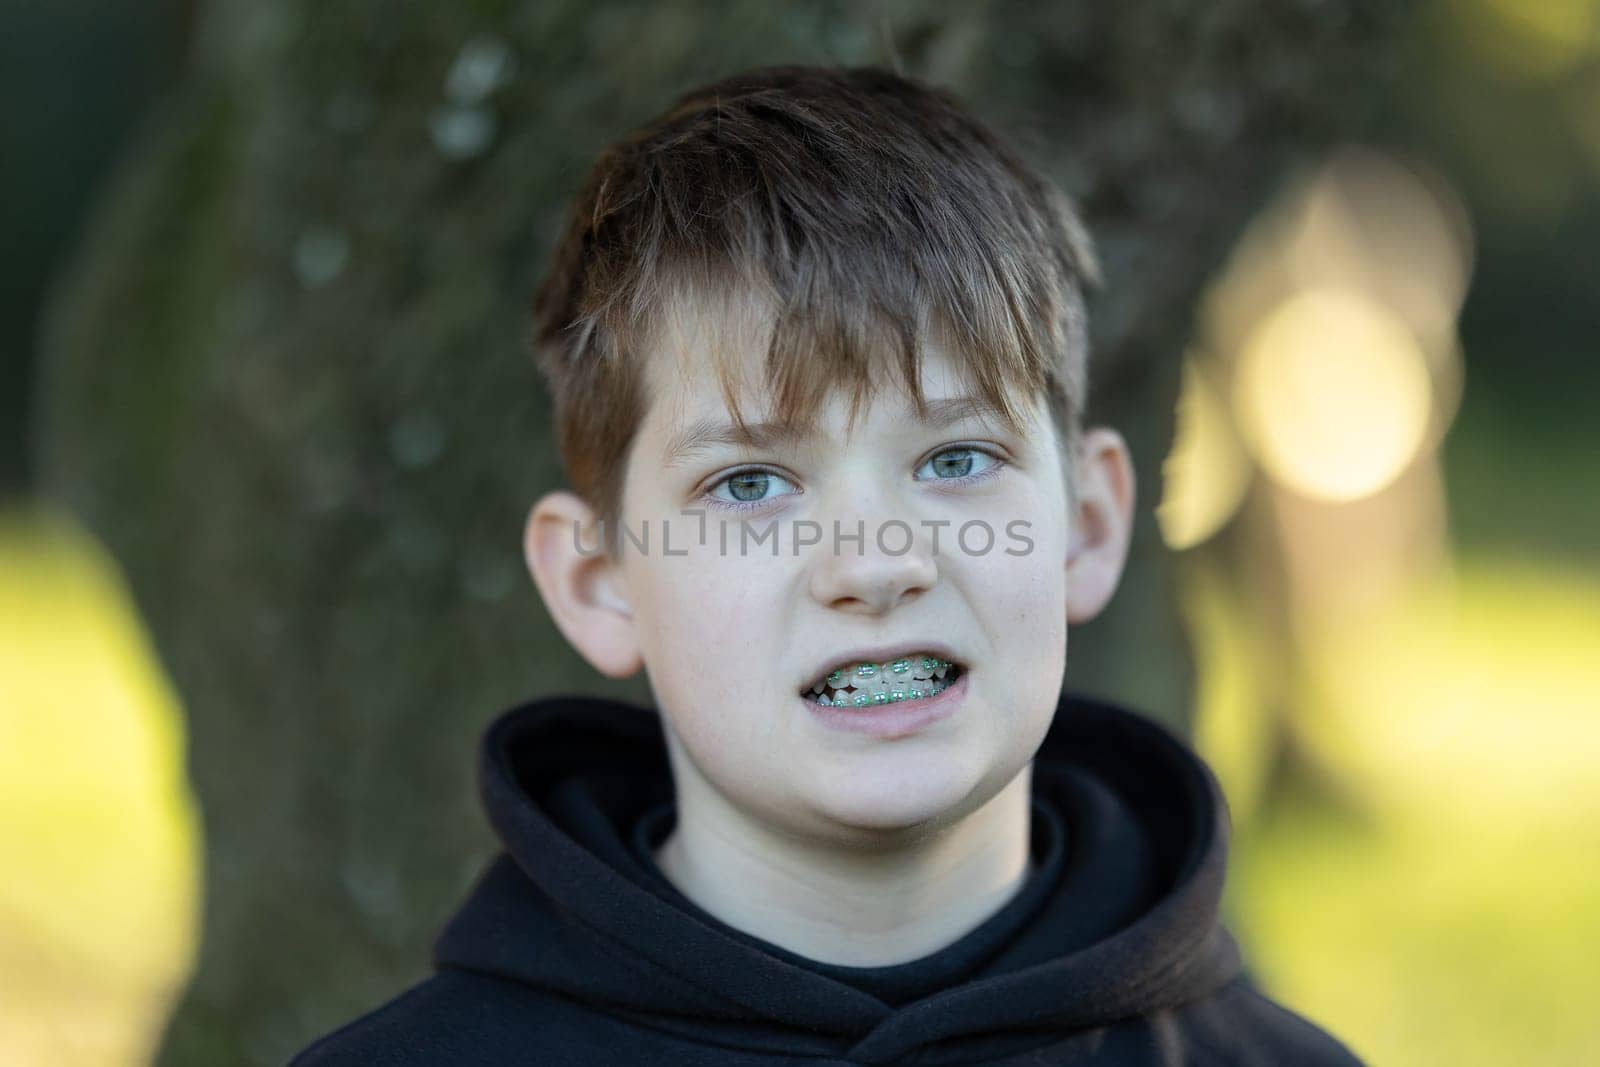 A boy with braces is standing in front of a tree. He has a serious expression on his face